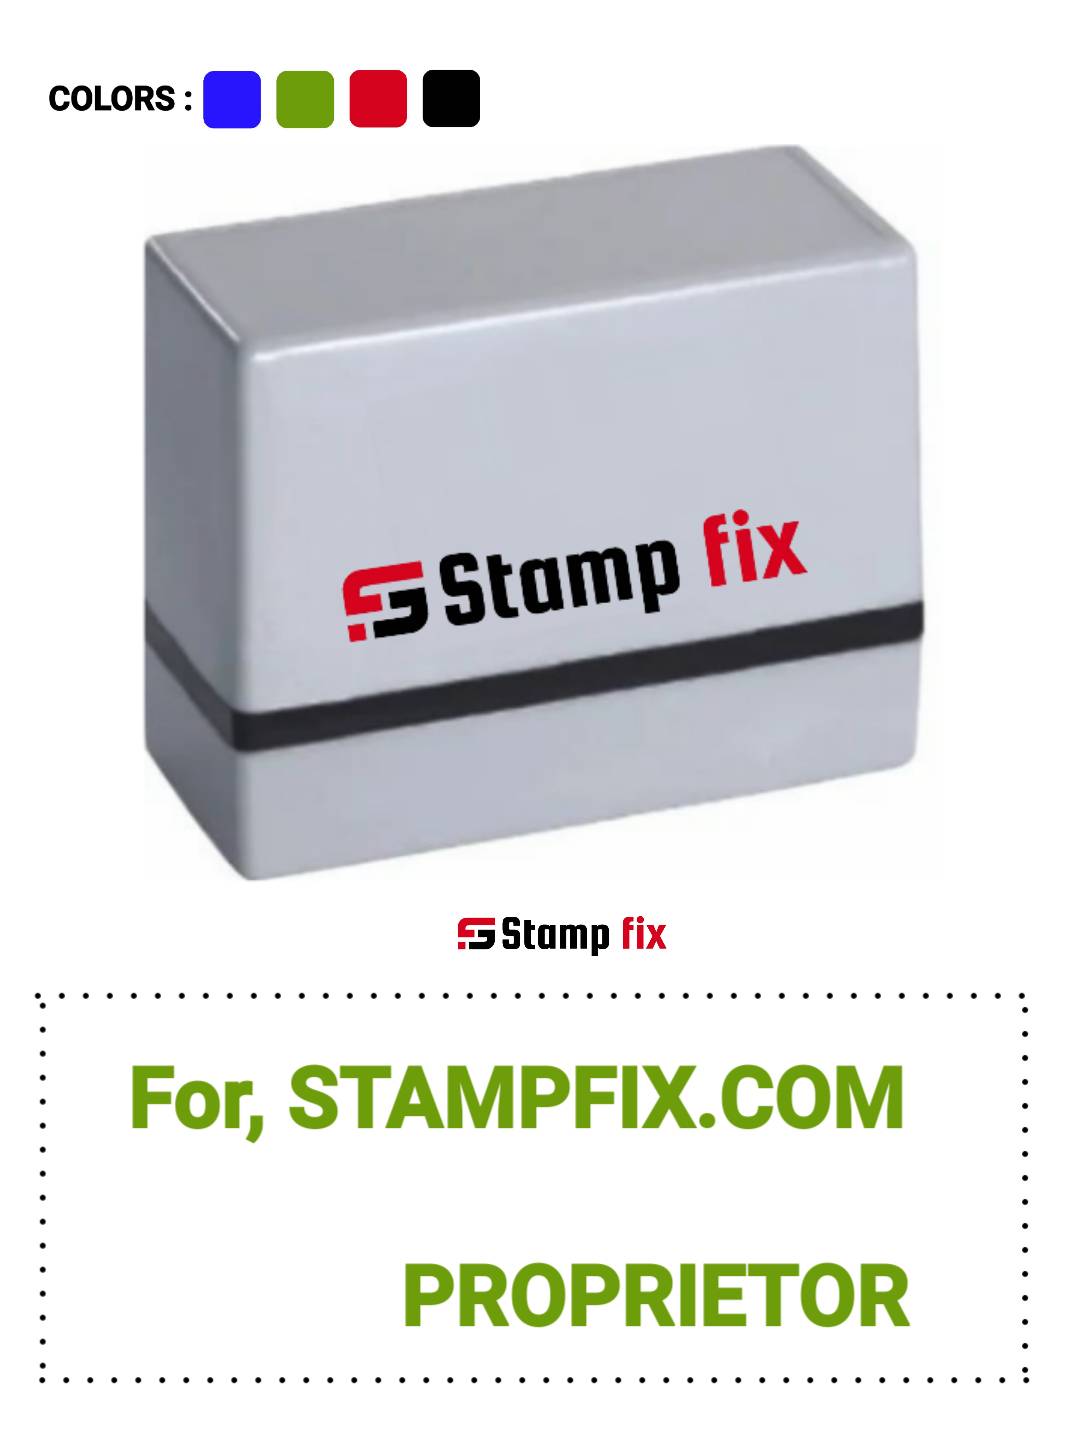 Pre Ink proprietor stamp, business stamp, retail stamp, owner stamp, director stamp, patner stamp , firm stamp, easy stamp, shop stamp, business marking stamp, Stamp by StampFix, a self-inking stamp with high-quality impressions
in India, nylon stamp, rubber stamp, pre ink stamp, polymer stamp, urgent stamp